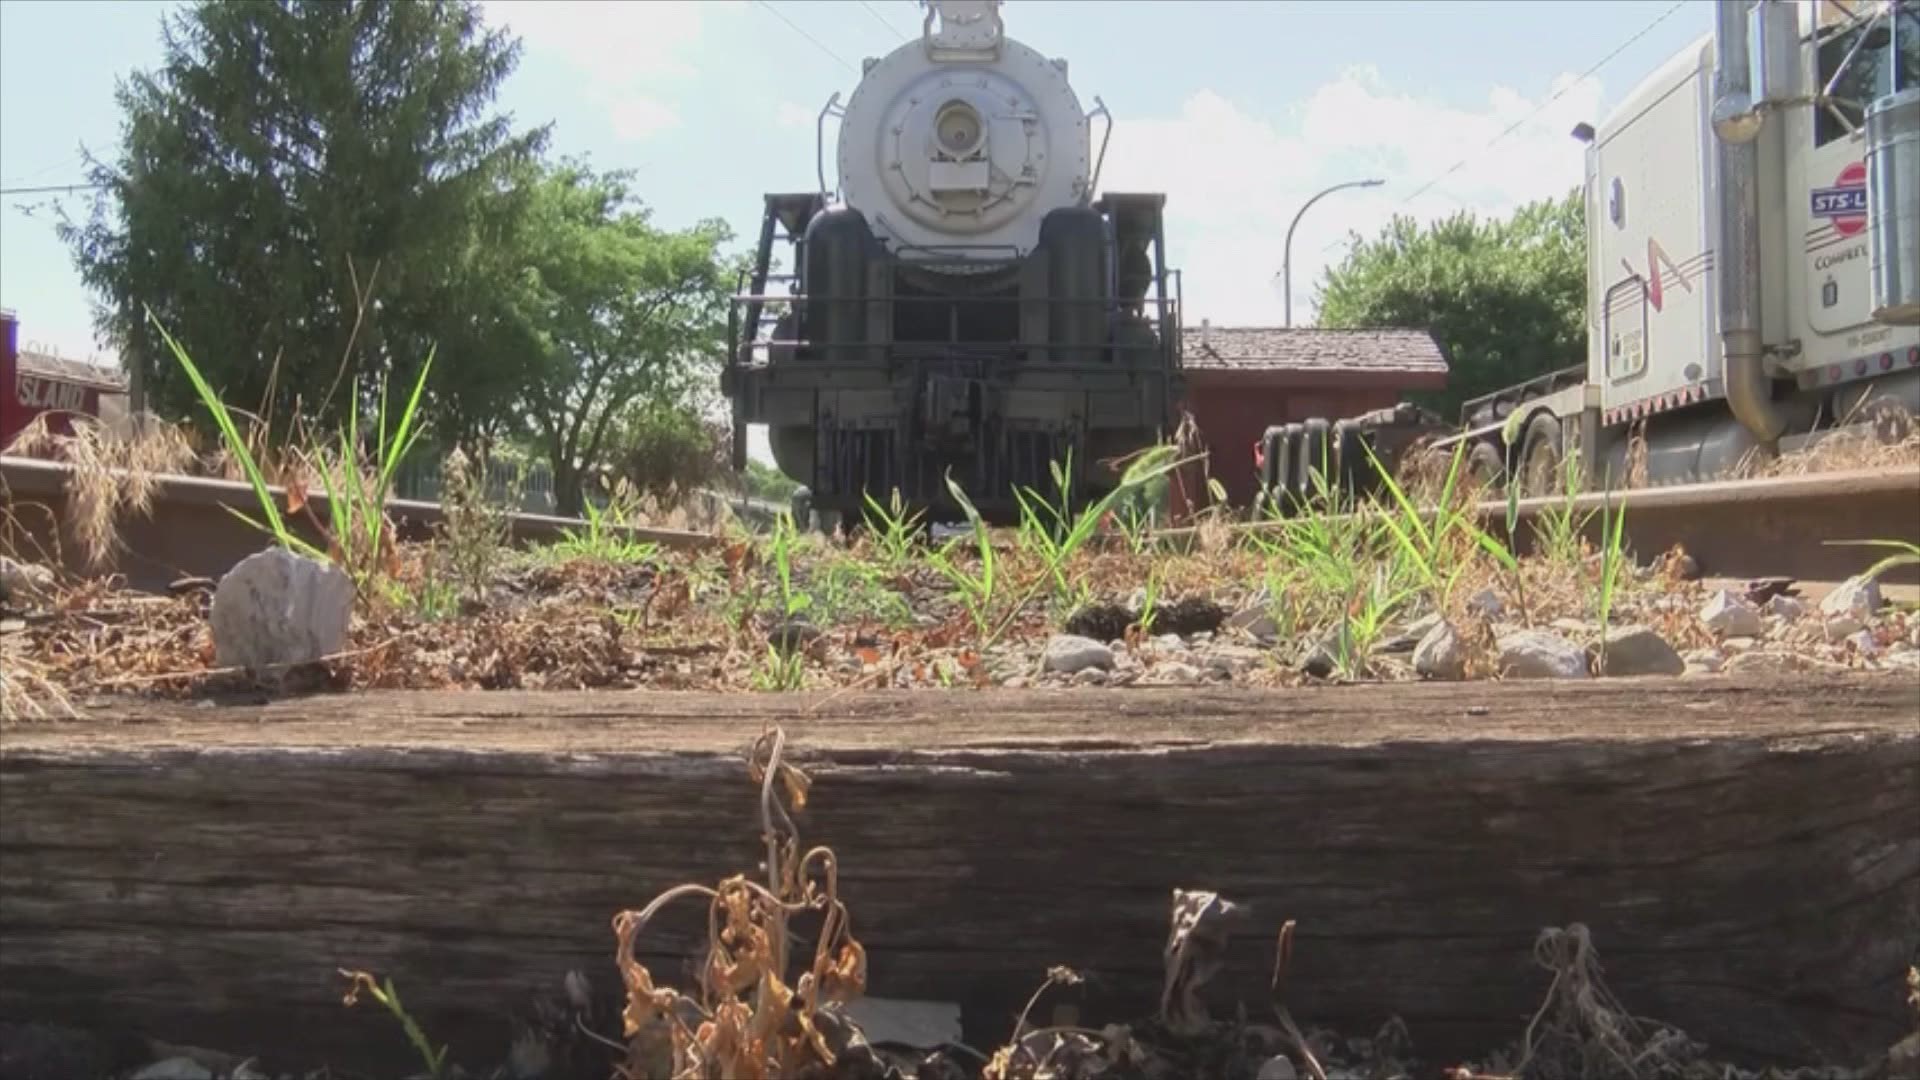 The Boone Train Rotory Committee refurbished an old locomotive for one purpose: to be a landmark.